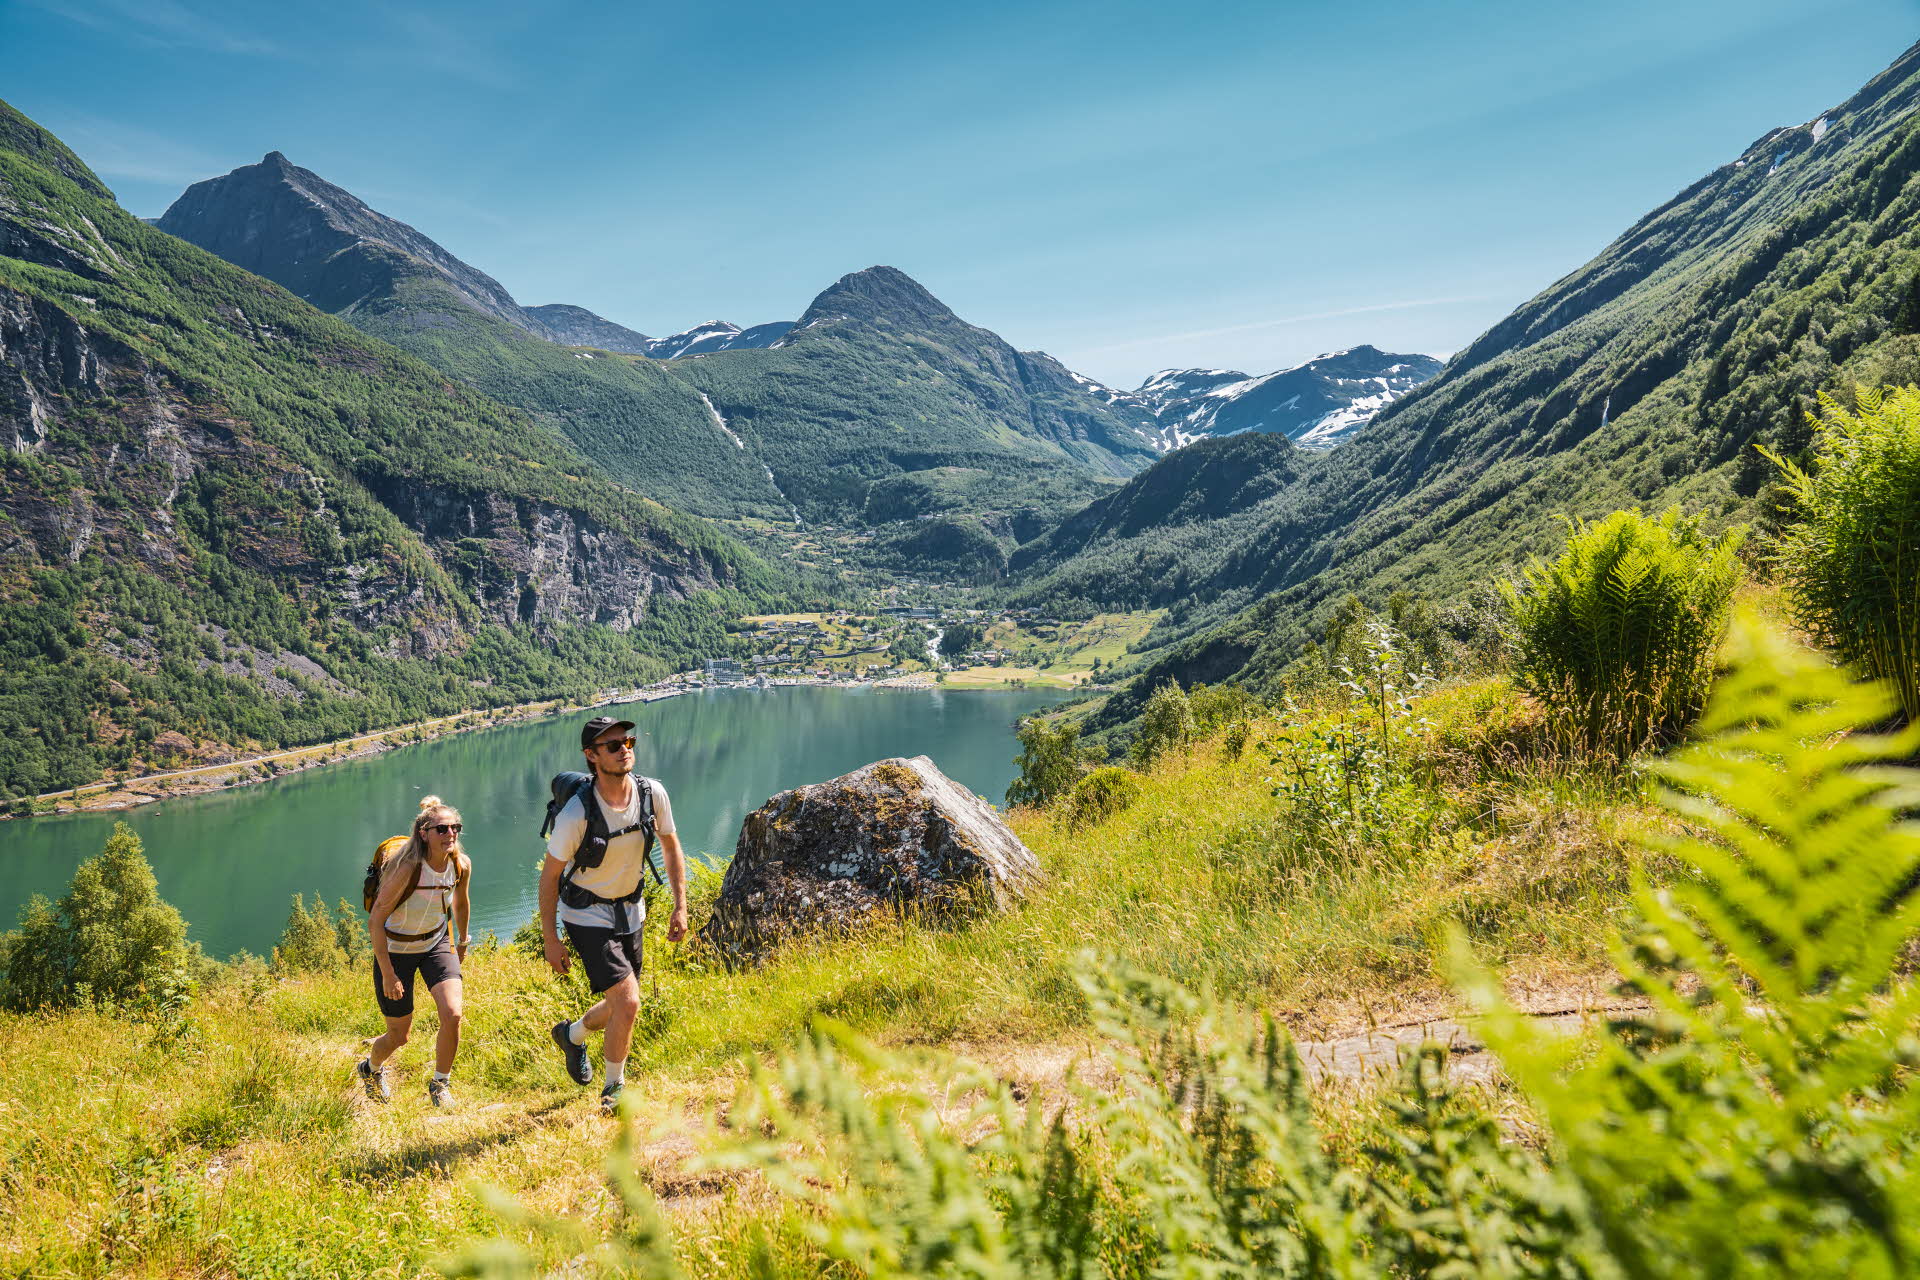 A man and woman hiking with Geiranger and Geirangerfjord in the background